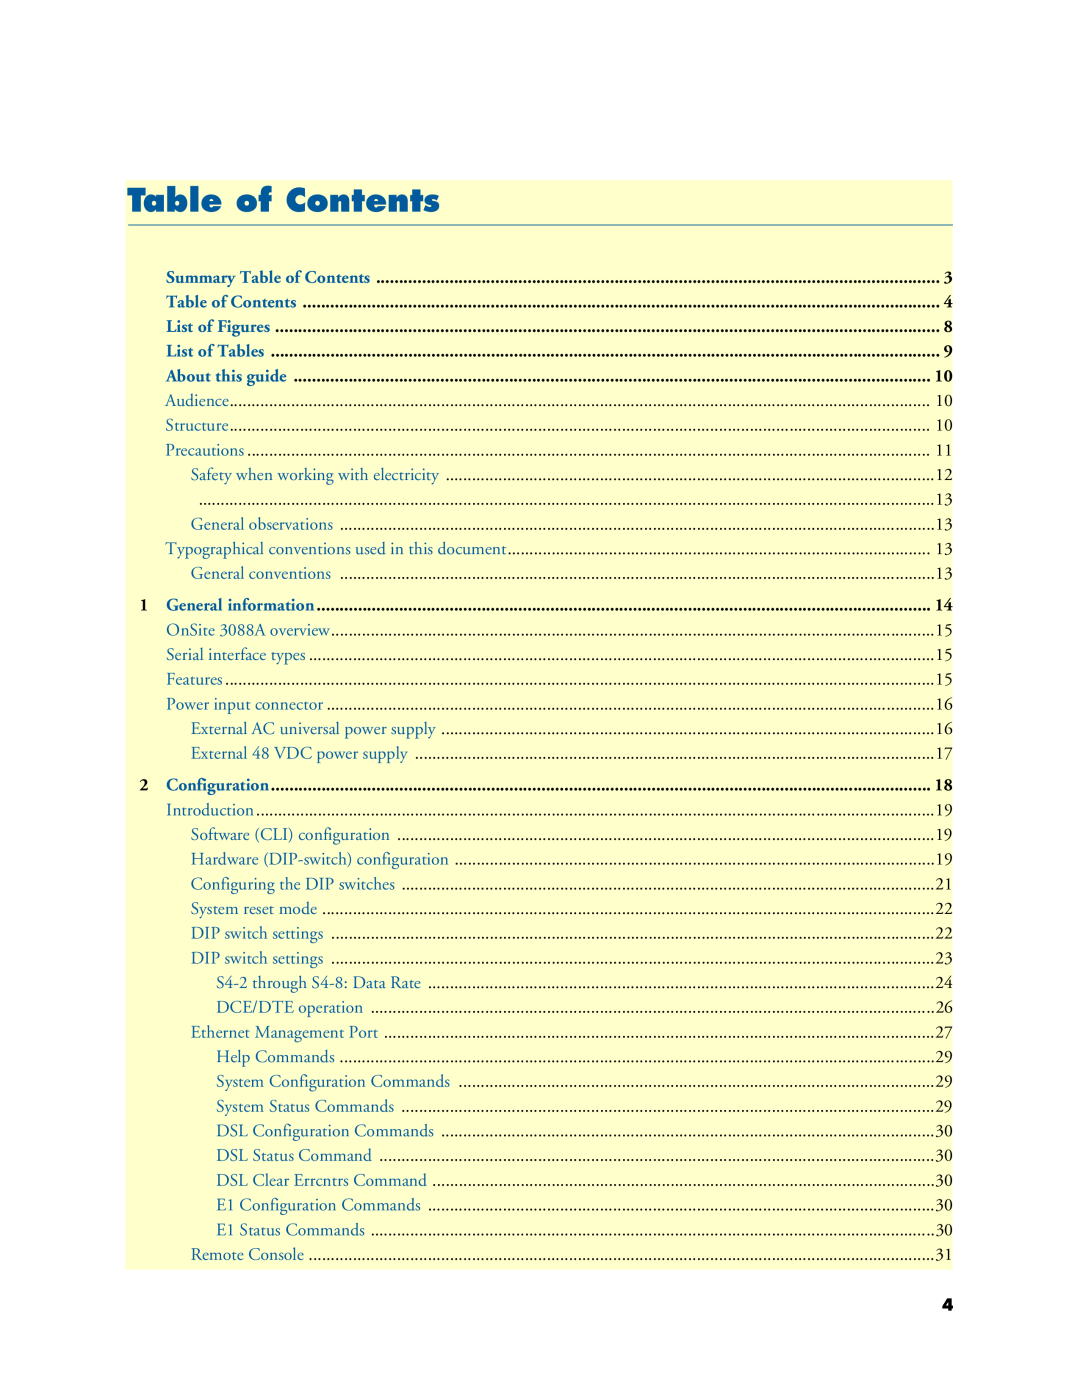 Patton electronic 3088A Summary Table of Contents, List of Figures, List of Tables, About this guide, Configuration 